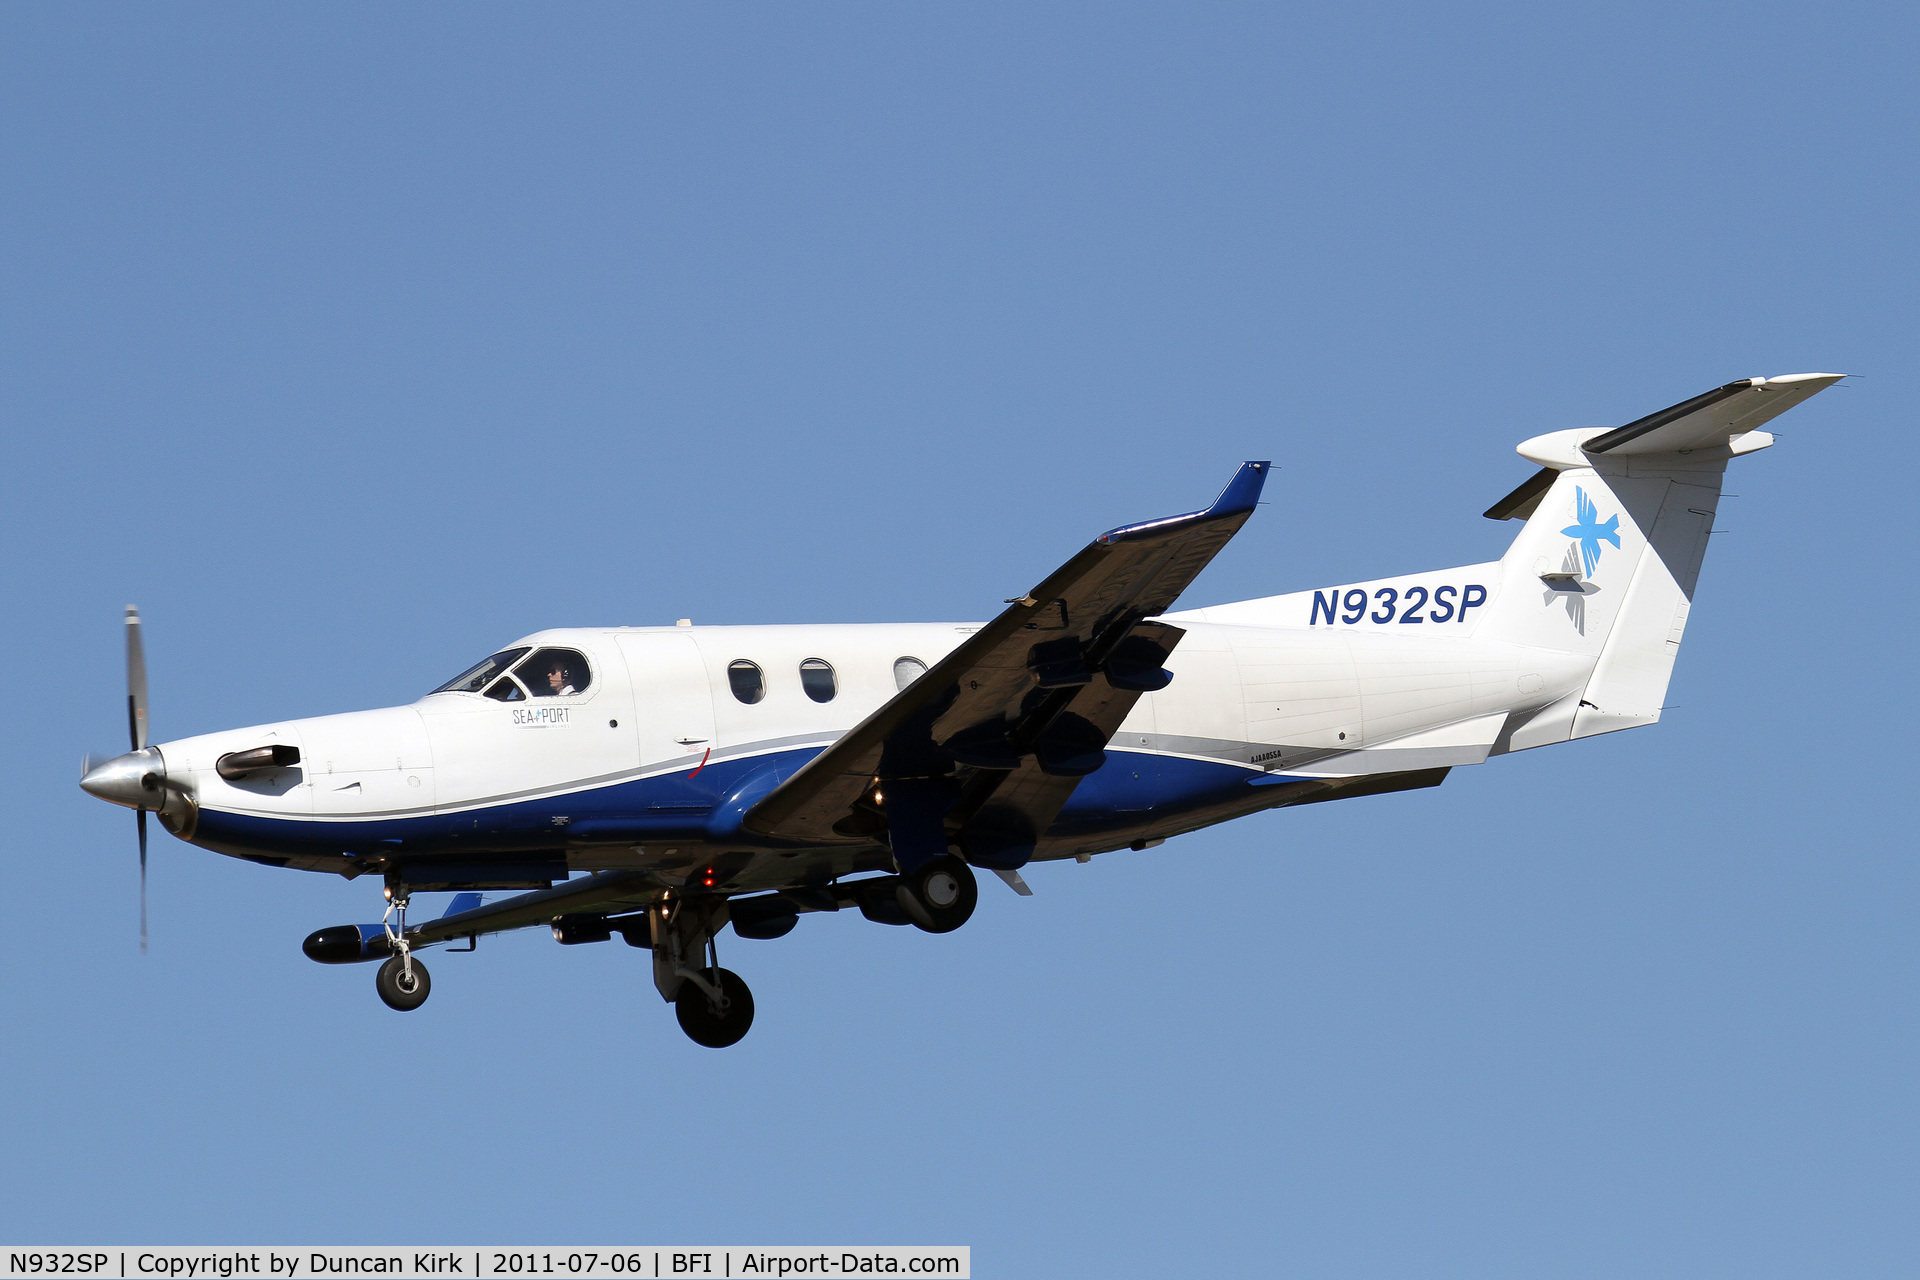 N932SP, 1998 Pilatus PC-12/45 C/N 222, SeaPort operates scheduled flights from BFI to Portland